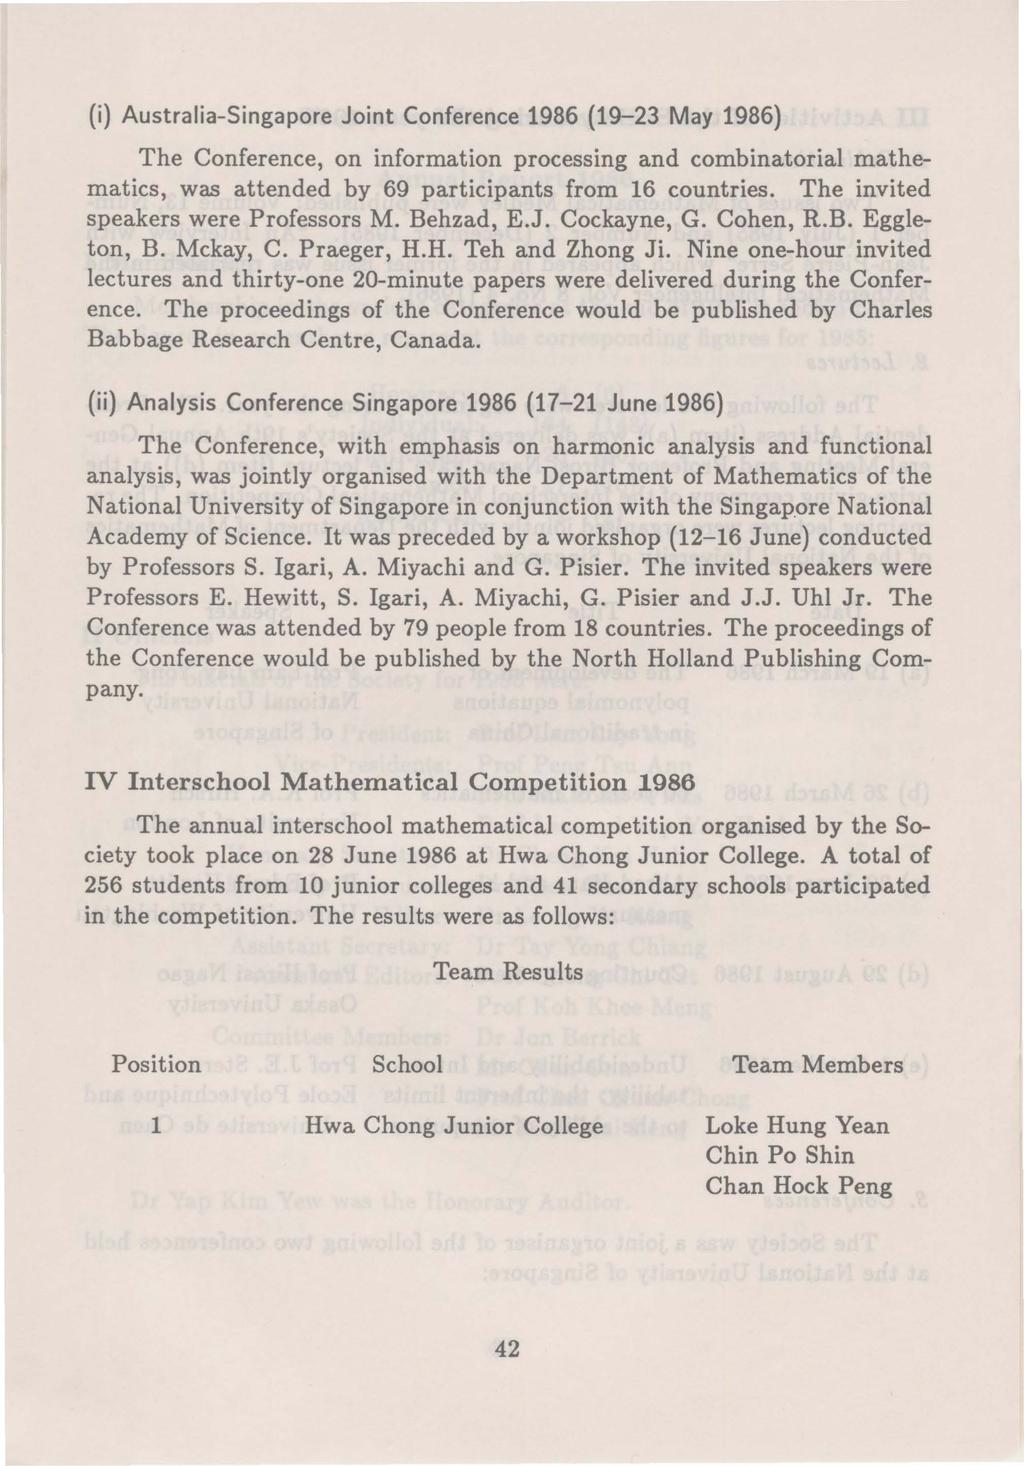 (i) Australia-Singapore Joint Conference 1986 (19-23 May 1986) The Conference, on information processing and combinatorial mathematics, was attended by 69 participants from 16 countries.